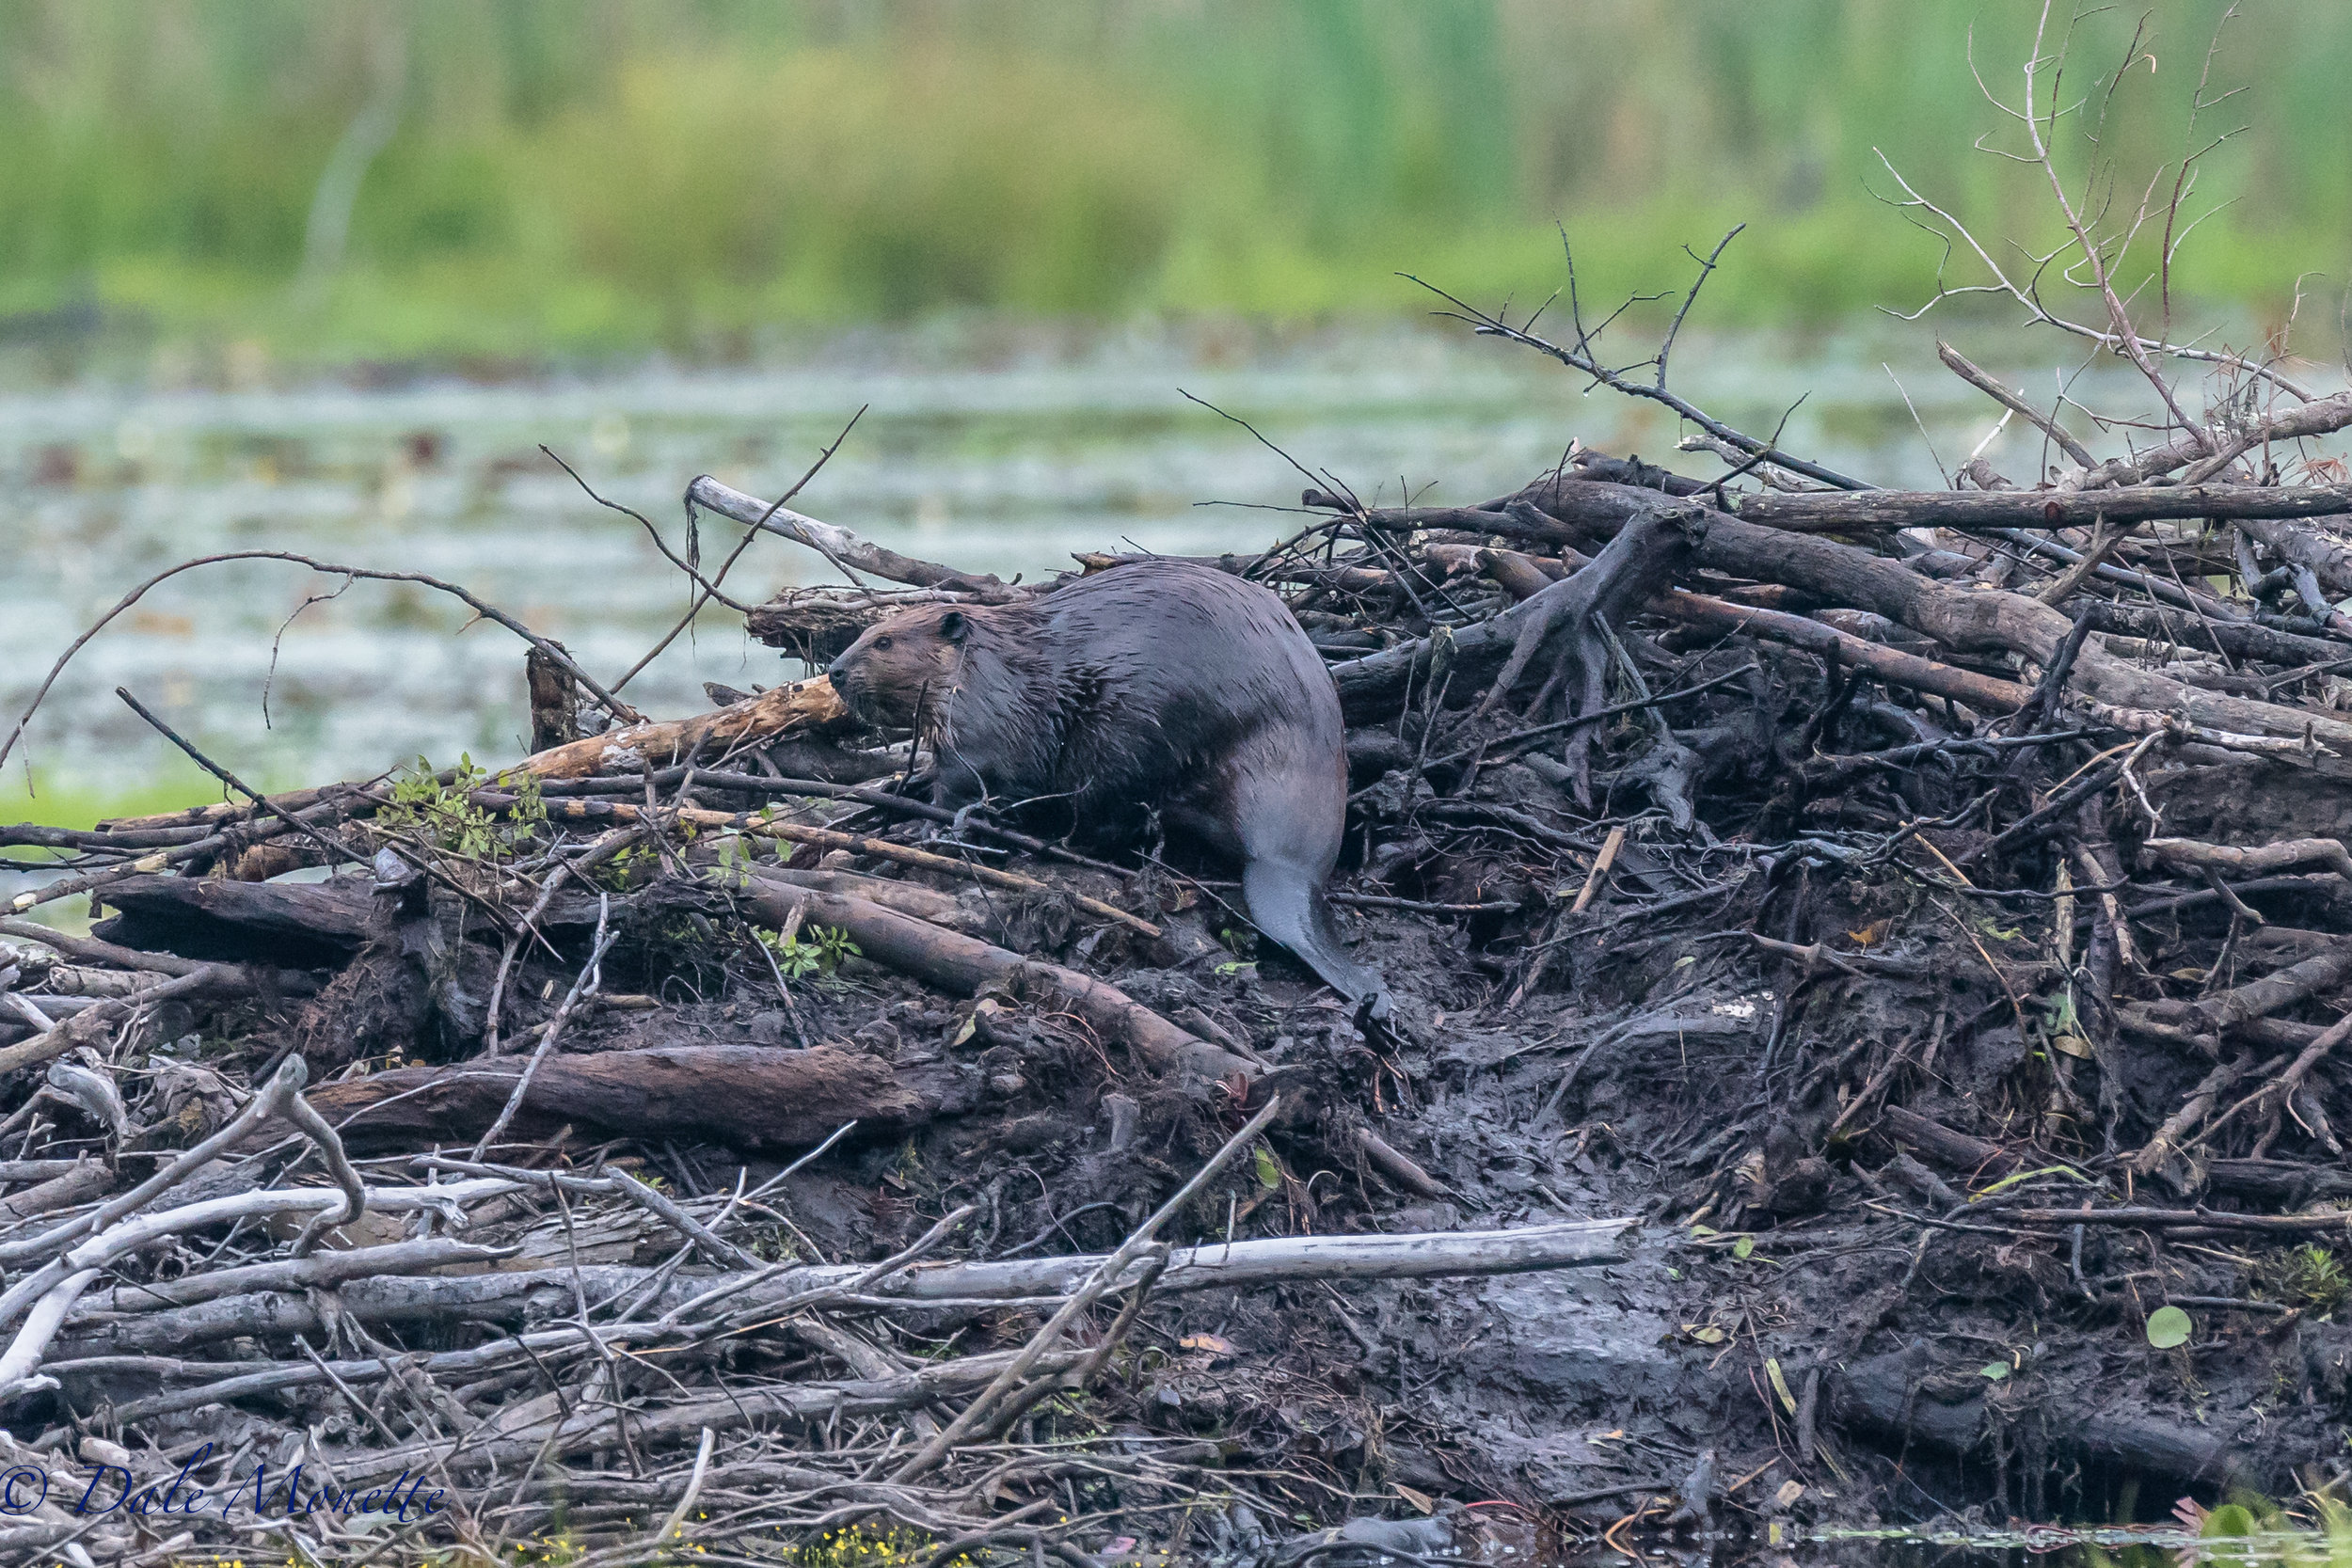   It's that time of year when beavers are starting to patch up the air holes in their lodges and getting ready for winter. After the holes are filled the food cache will be the next priority. &nbsp;They will need lots of shrubbery and branches to get